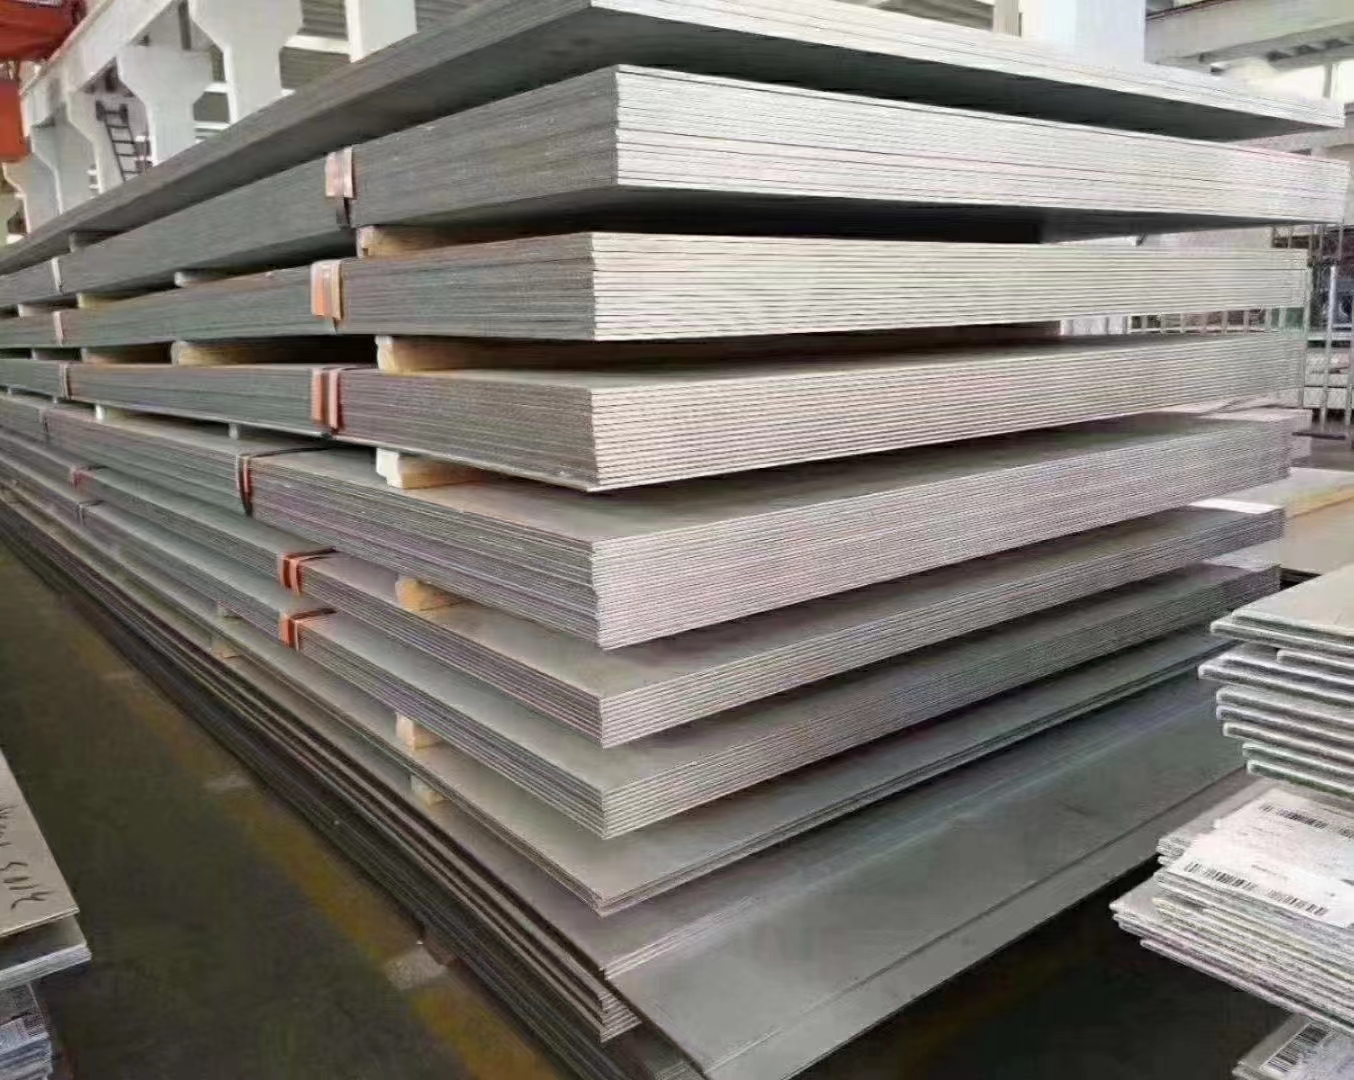 AISI SUS 4*8 5*10 SS sheet 0.3mm 0.5mm 0.8mm 1.0mm 1.2mm 1.5mm 2mm 3mm 2B 201 J1 J2 304 304L 316 321 stainless steel sheet plate